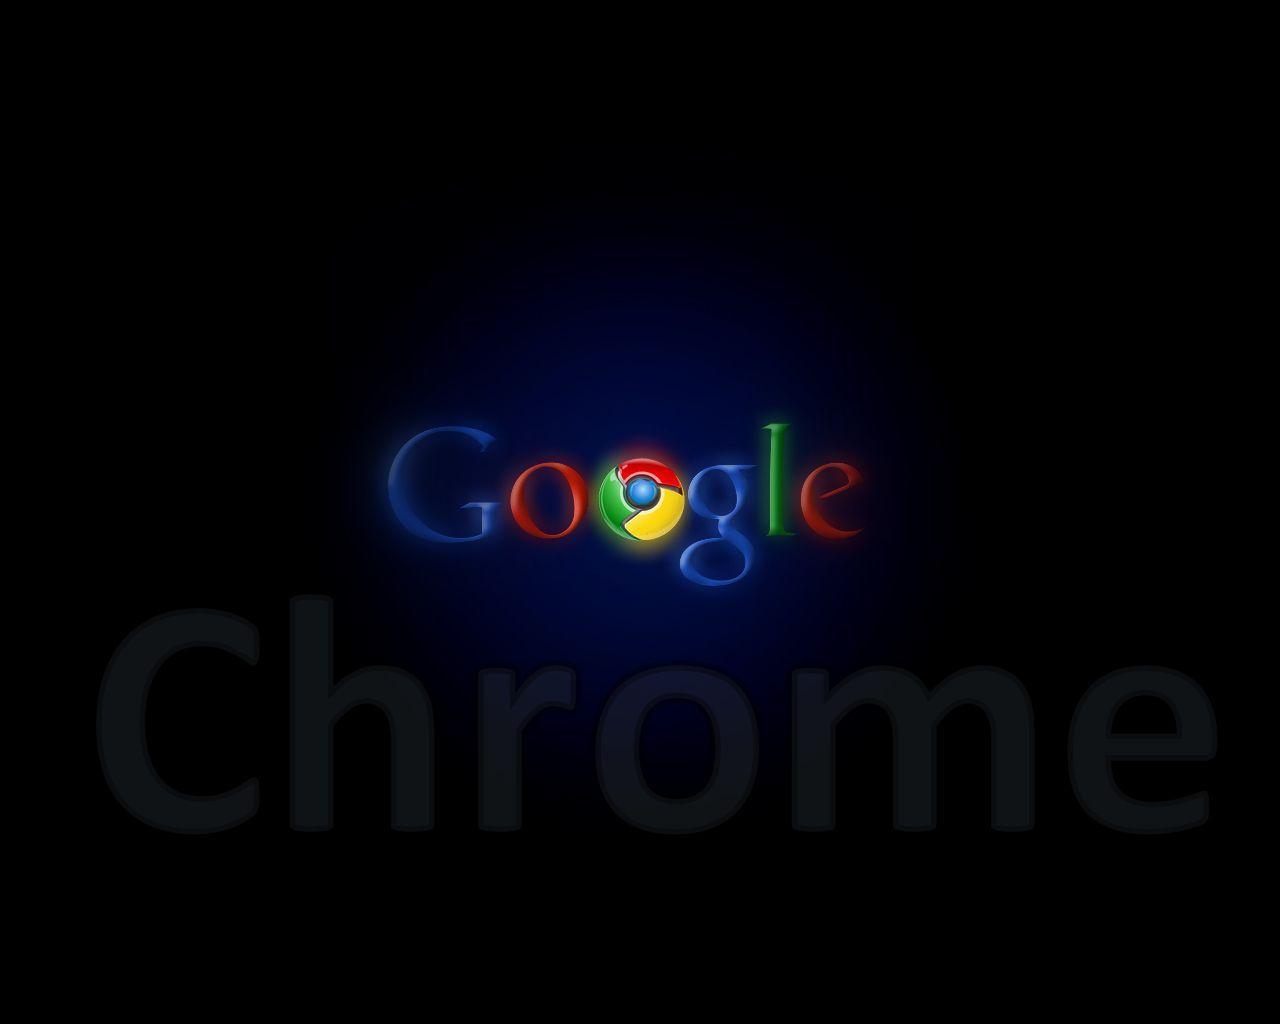 Google Chrome Wallpaper Background Image 8861 HD Picture. Best